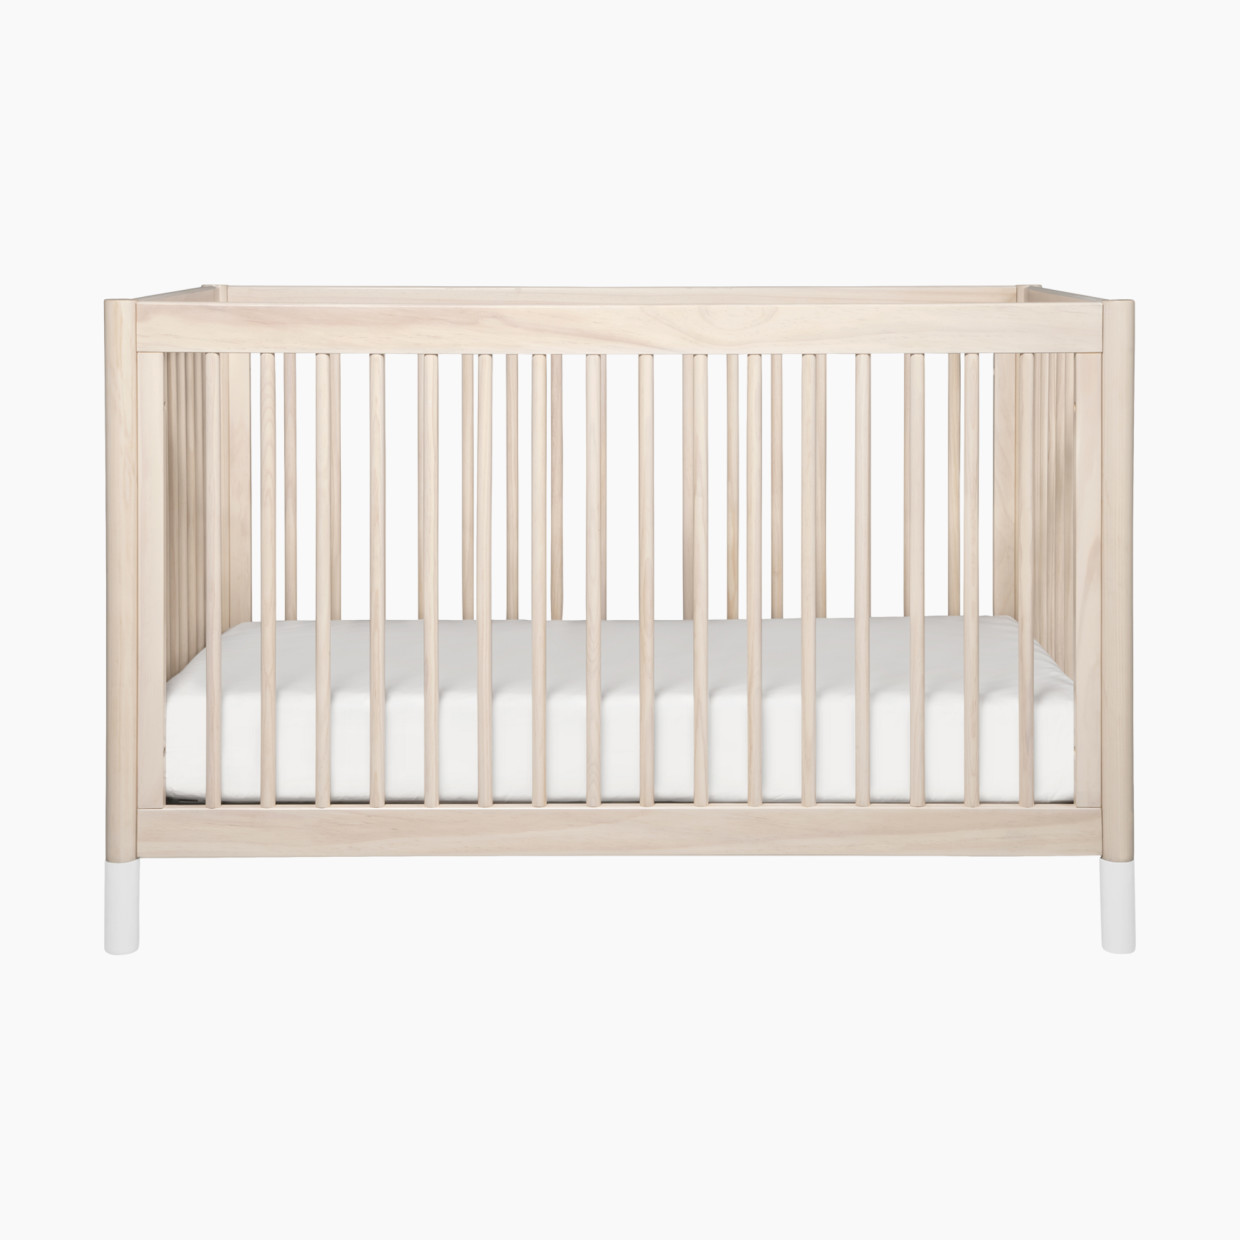 babyletto Gelato 4-in-1 Convertible Crib with Toddler Bed Conversion Kit - Washed Natural/White.